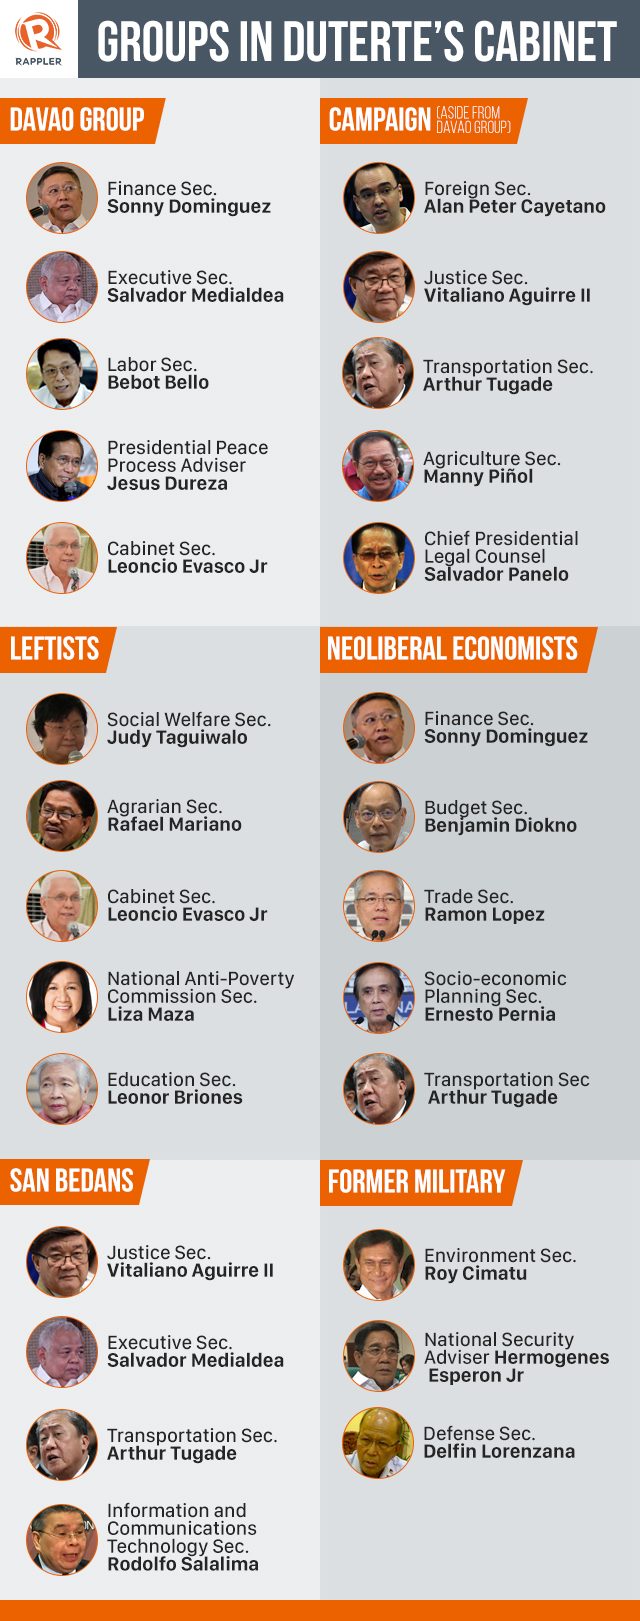 Keeping up with Duterte: A year inside the Cabinet